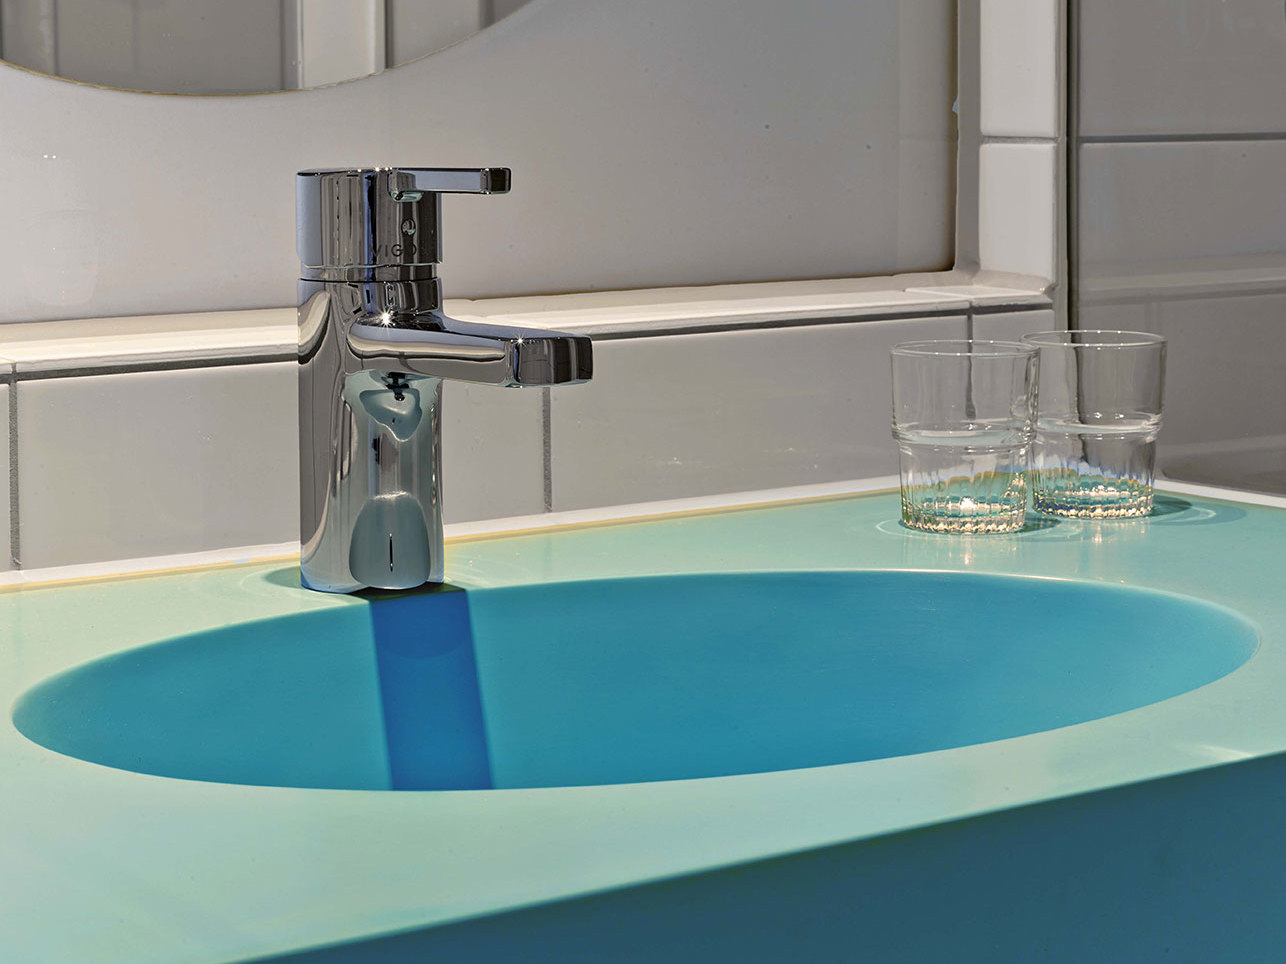 Details of a blue sink with two glasses 